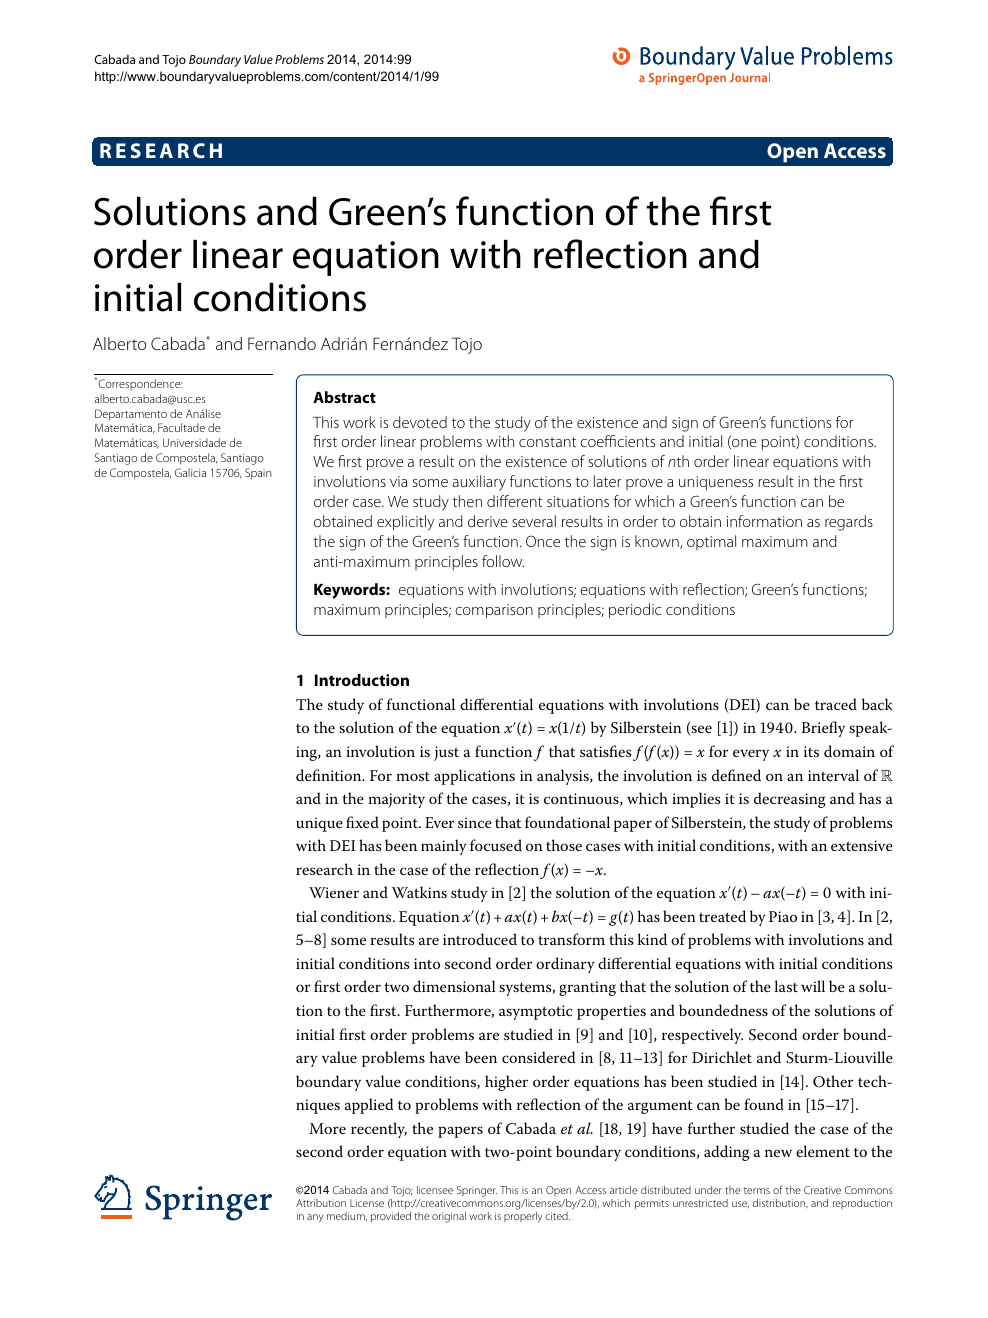 Solutions And Green S Function Of The First Order Linear Equation With Reflection And Initial Conditions Topic Of Research Paper In Mathematics Download Scholarly Article Pdf And Read For Free On Cyberleninka